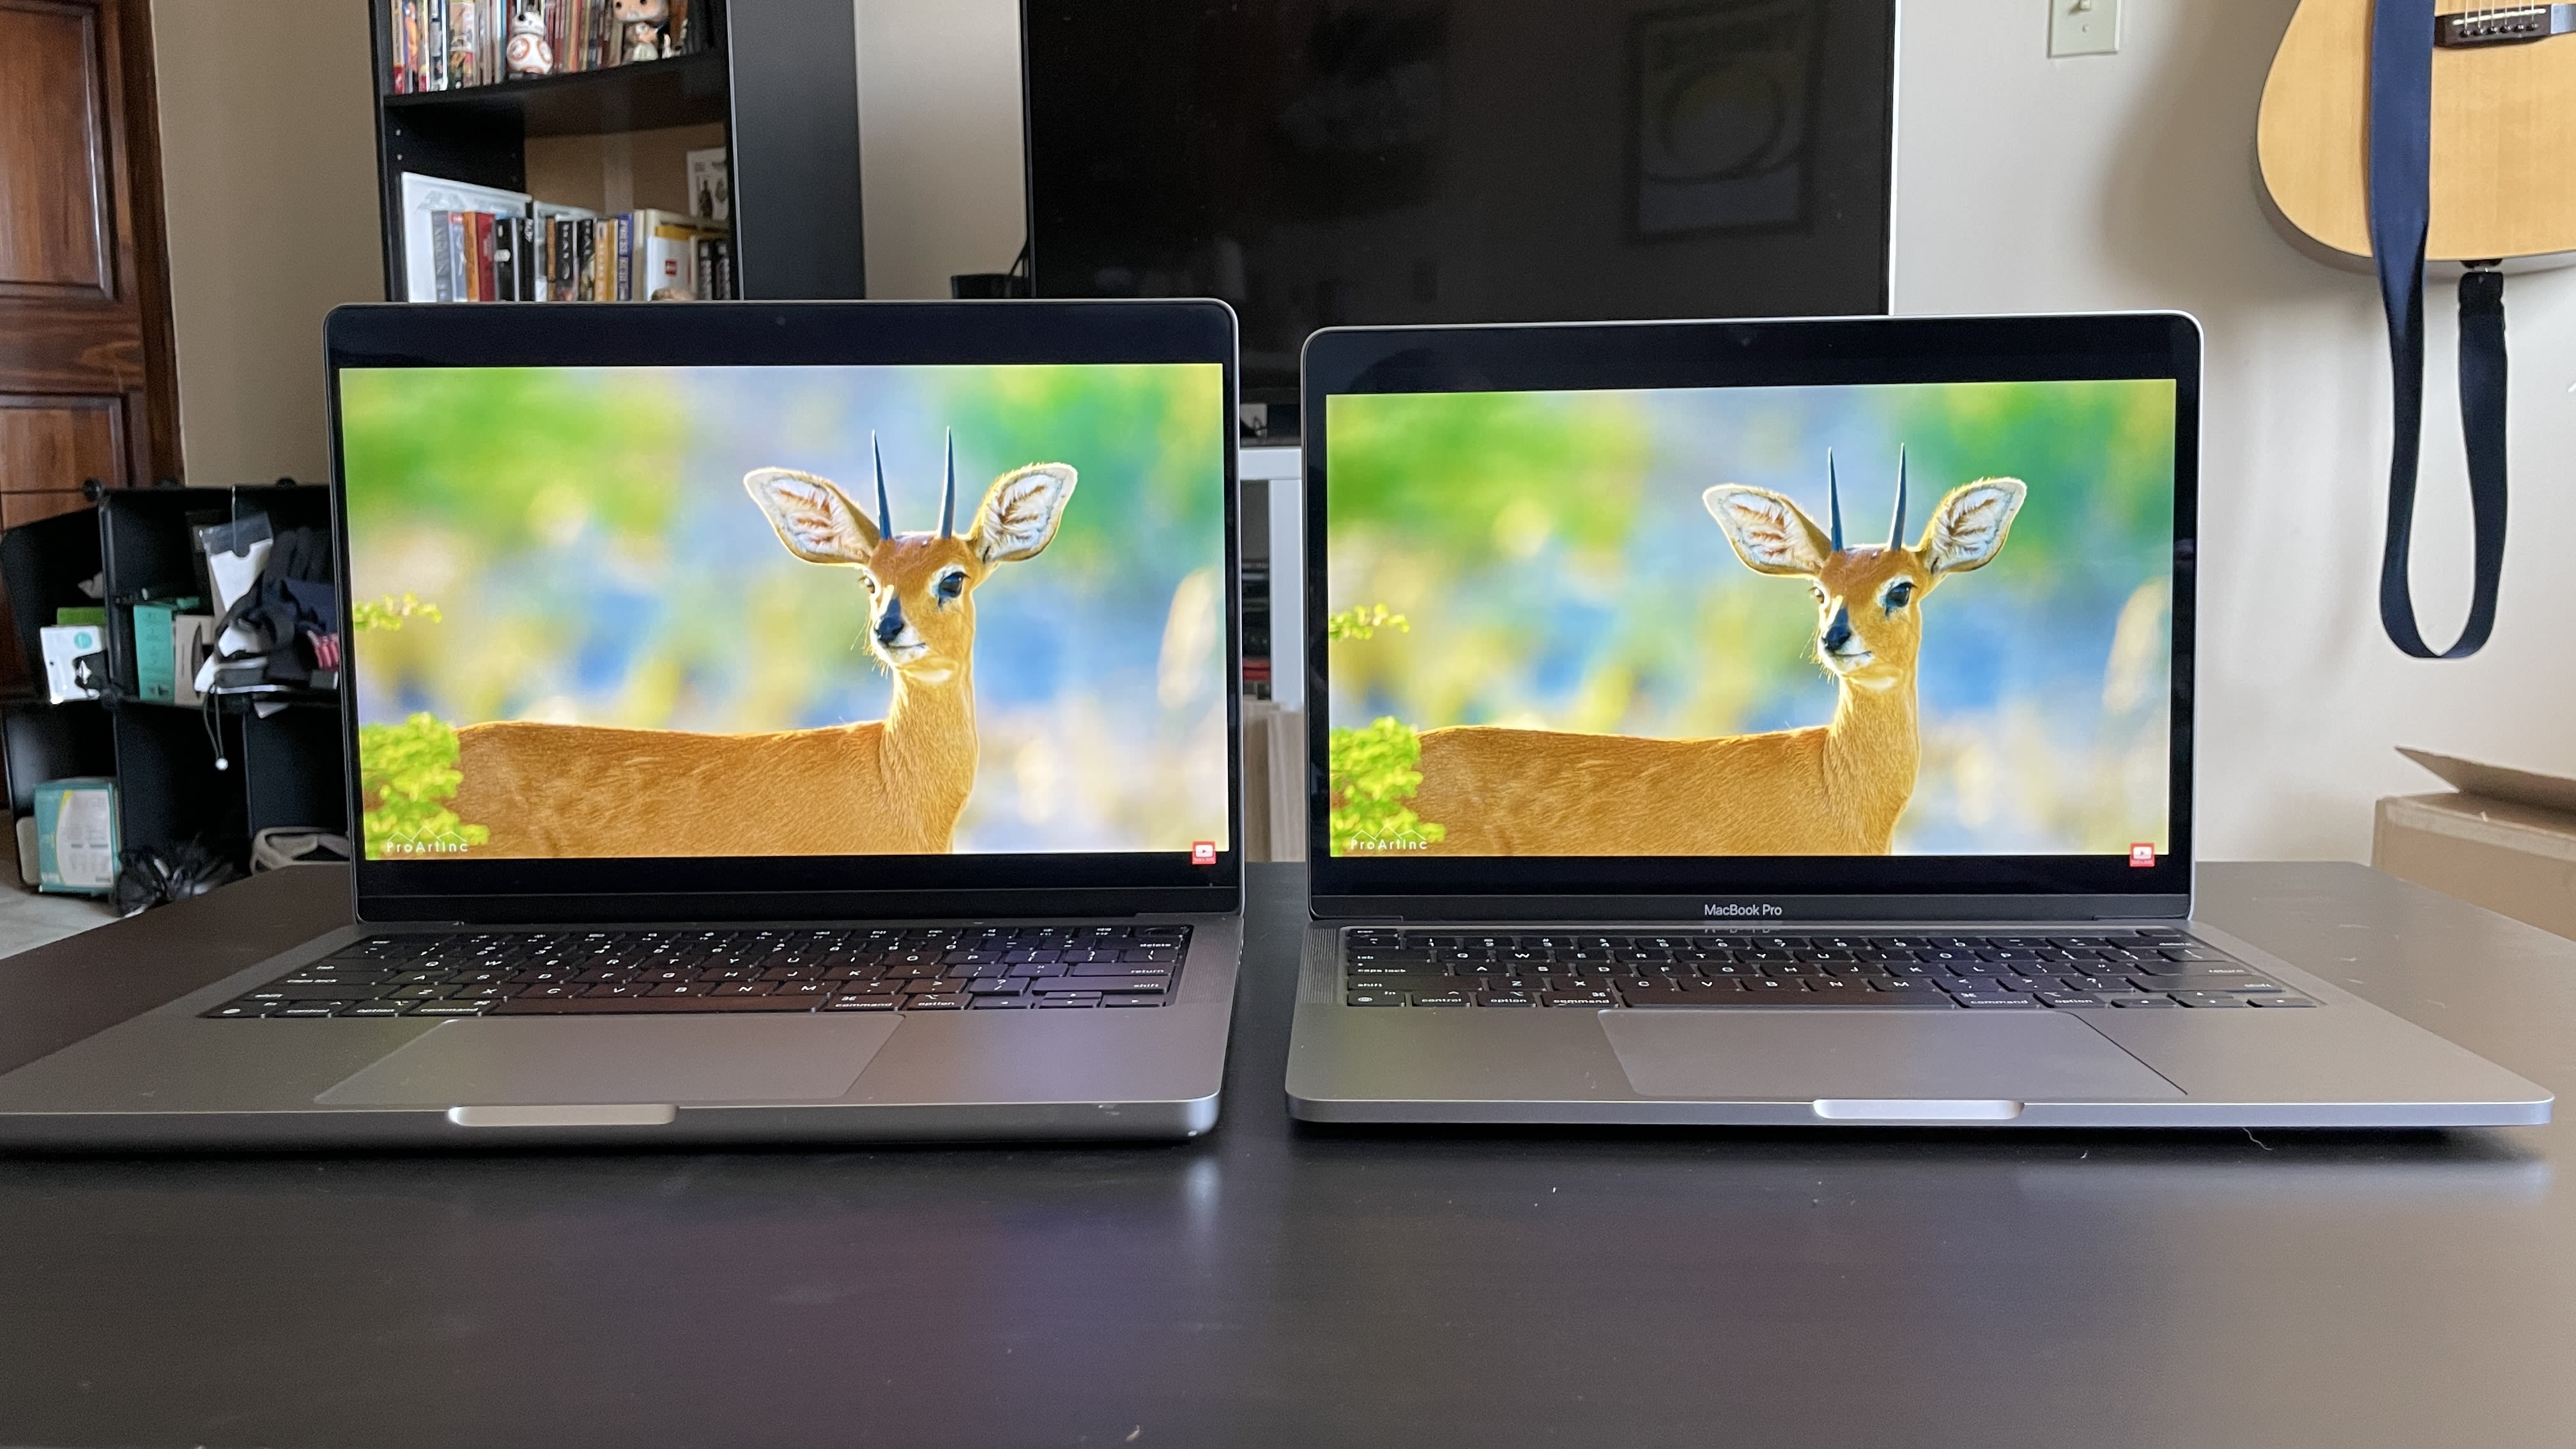 M2 MacBook Air or 14 MacBook Pro: Which should you buy?